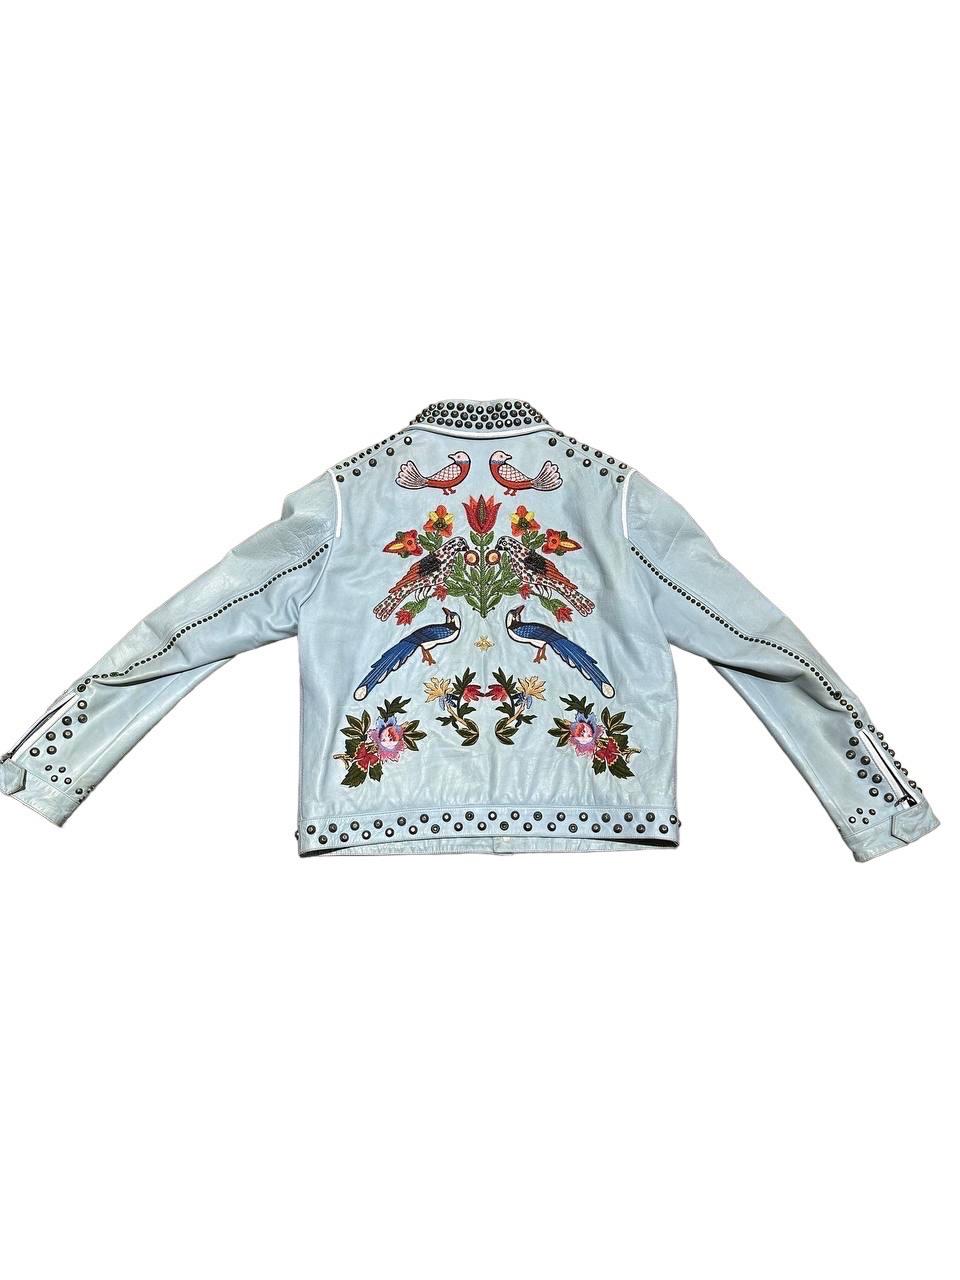 Men's Gucci Leather Jacket Light Blue Floreal Embroidery For Sale